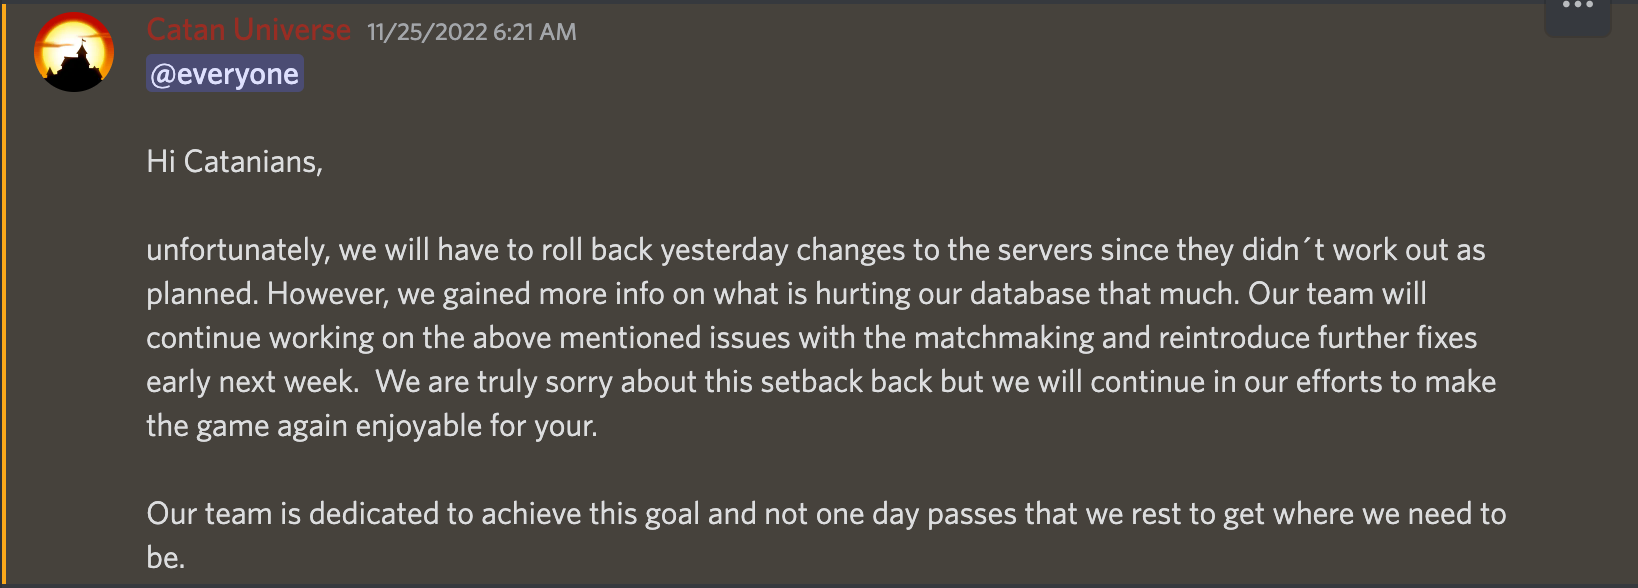 CU discord announcement that they will roll back previous statements